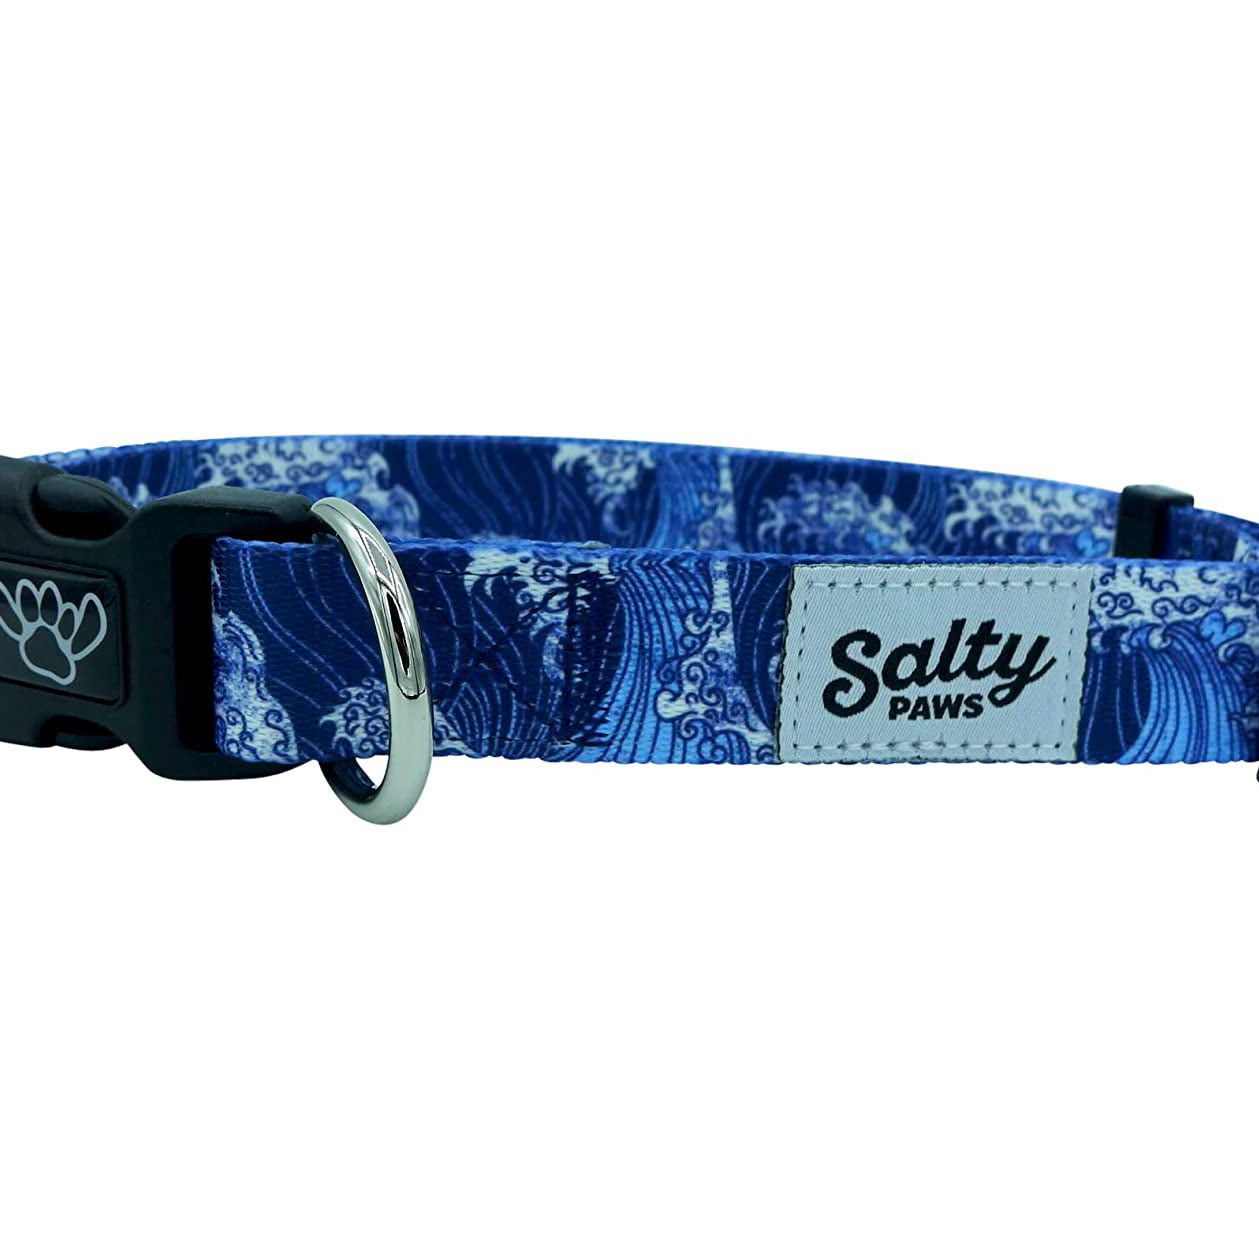 Salty Paws Surfing Dog Collar | Designs for Beach Dogs,  Floral, Fishing, Surfing, Hawaiian,  BlueWave M